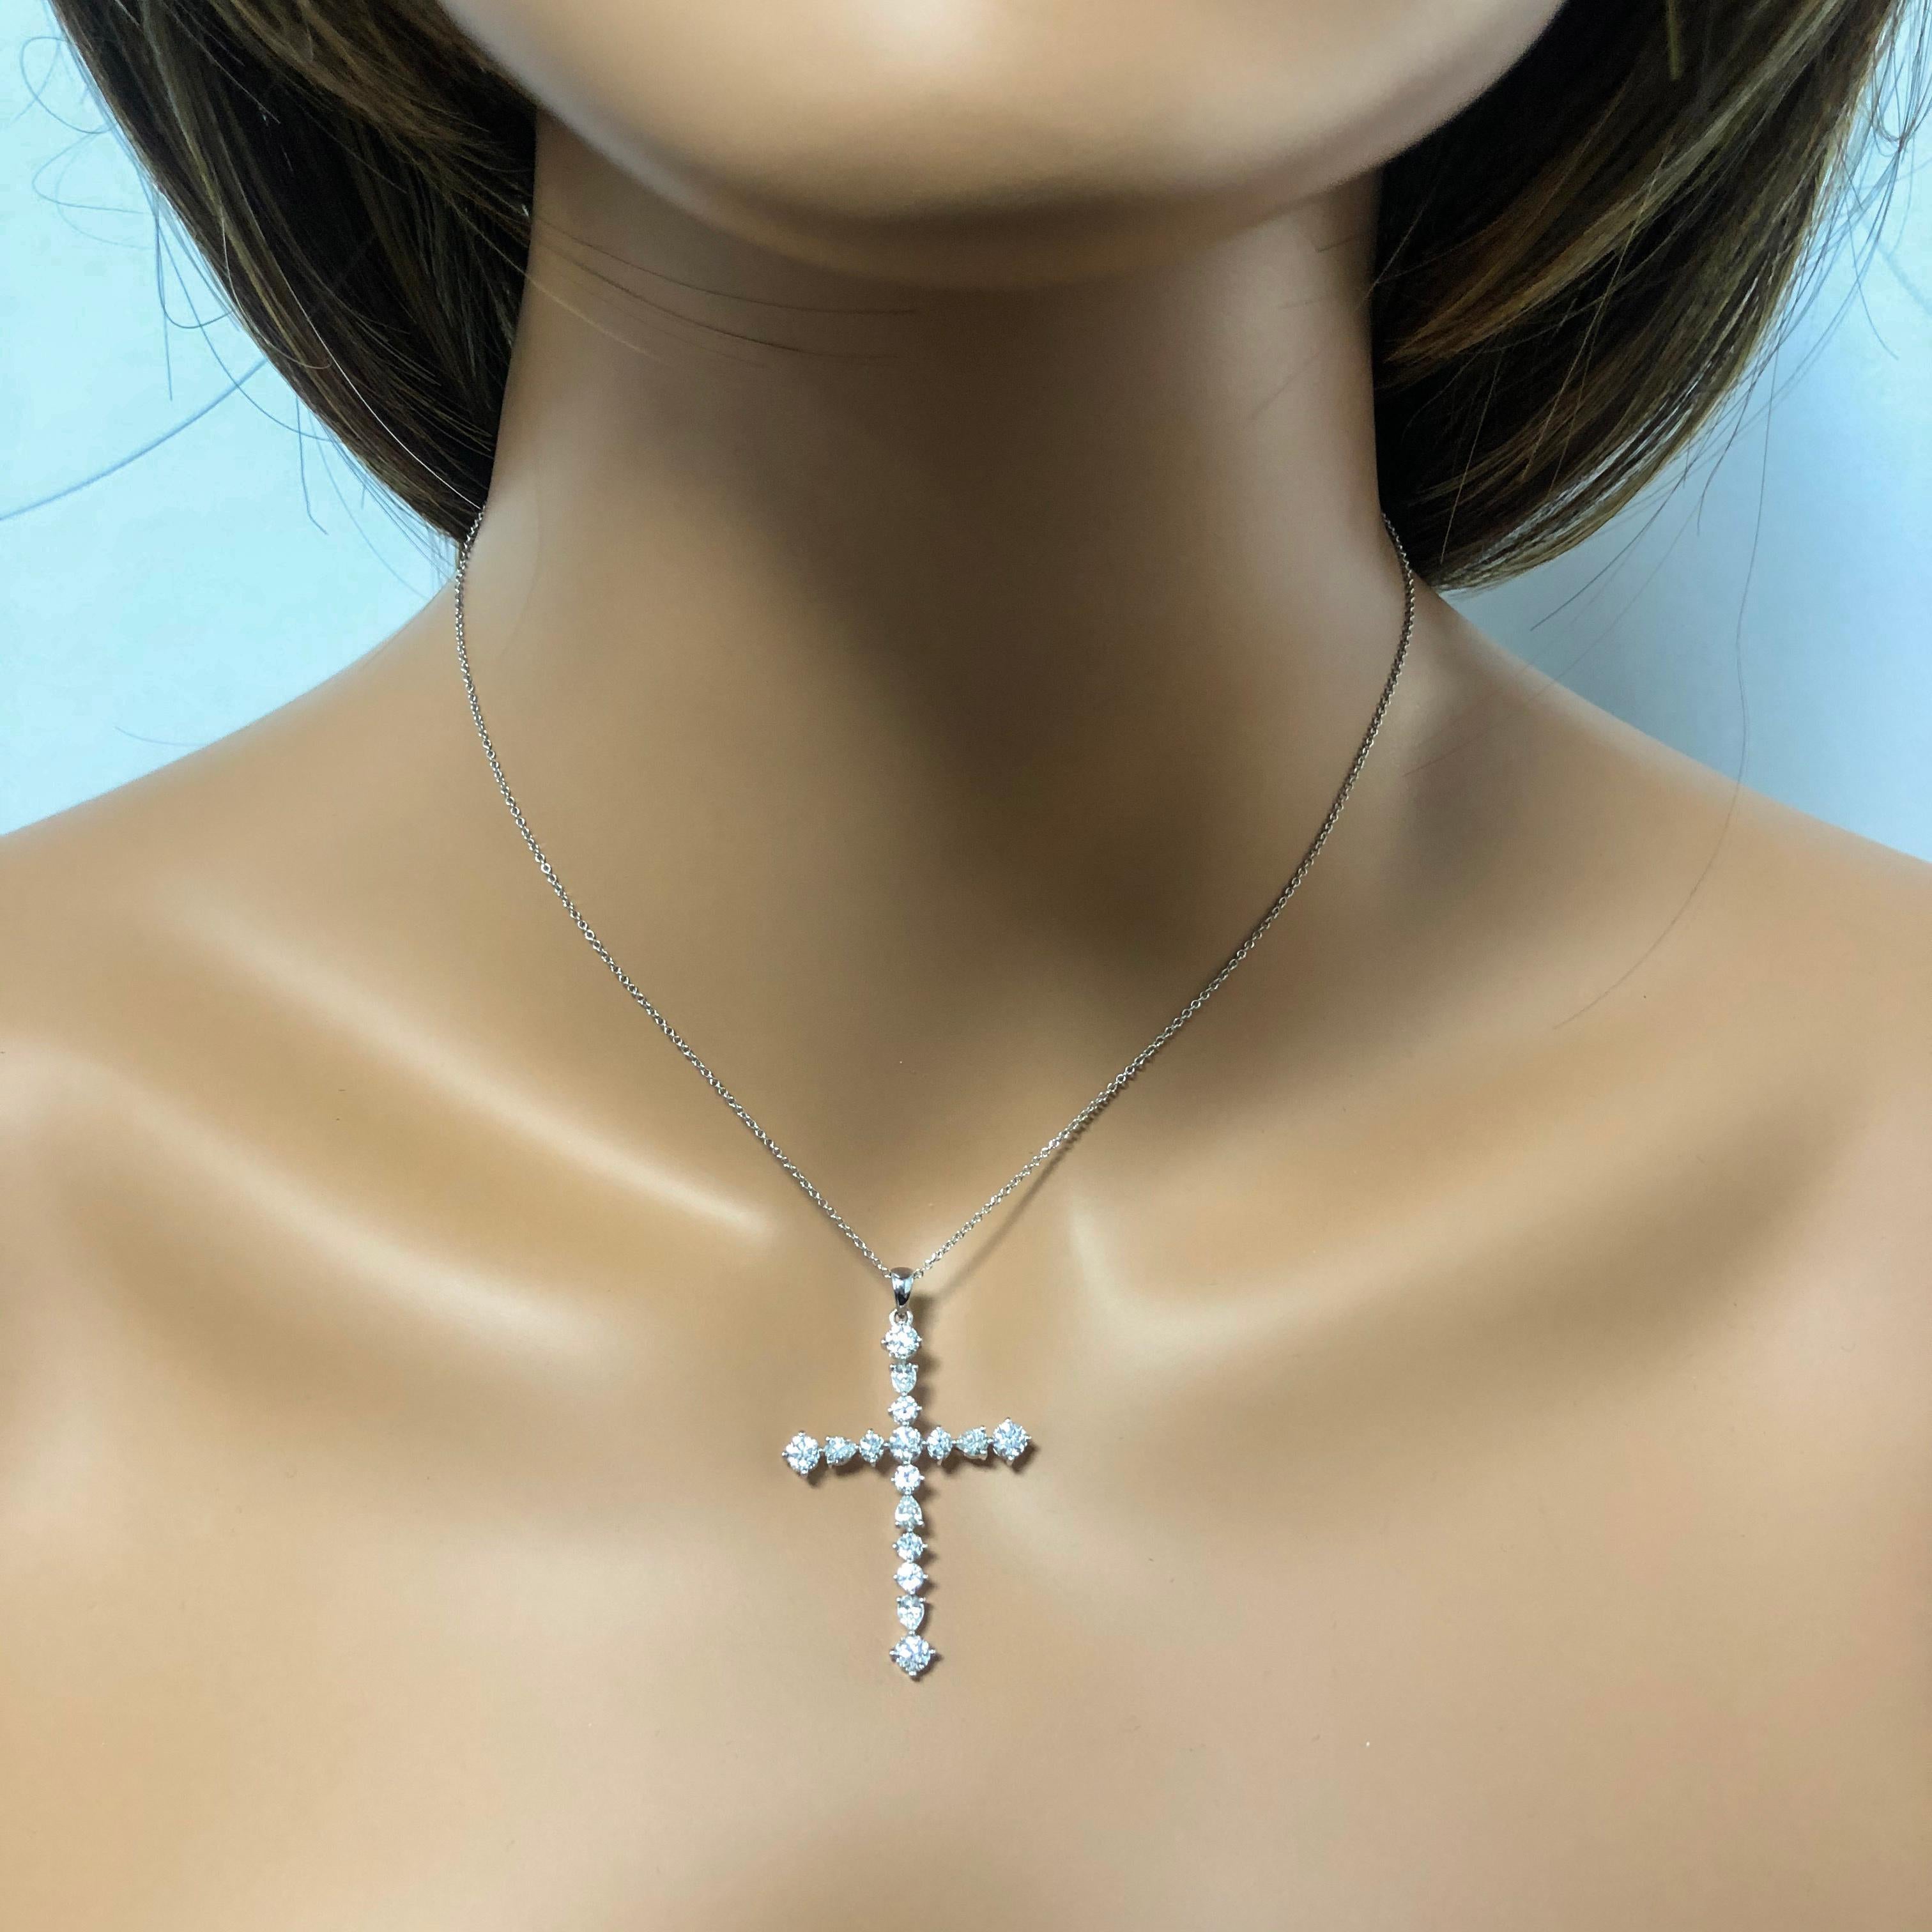 Cross Pendant Necklace set with different cut diamonds 16 different cut diamonds. Each corner ends with a round brilliant diamond. Diamonds weigh 2.23 carats total. Made in 18k white gold. Hangs on a 16 inch 18k gold chain.

Style available in